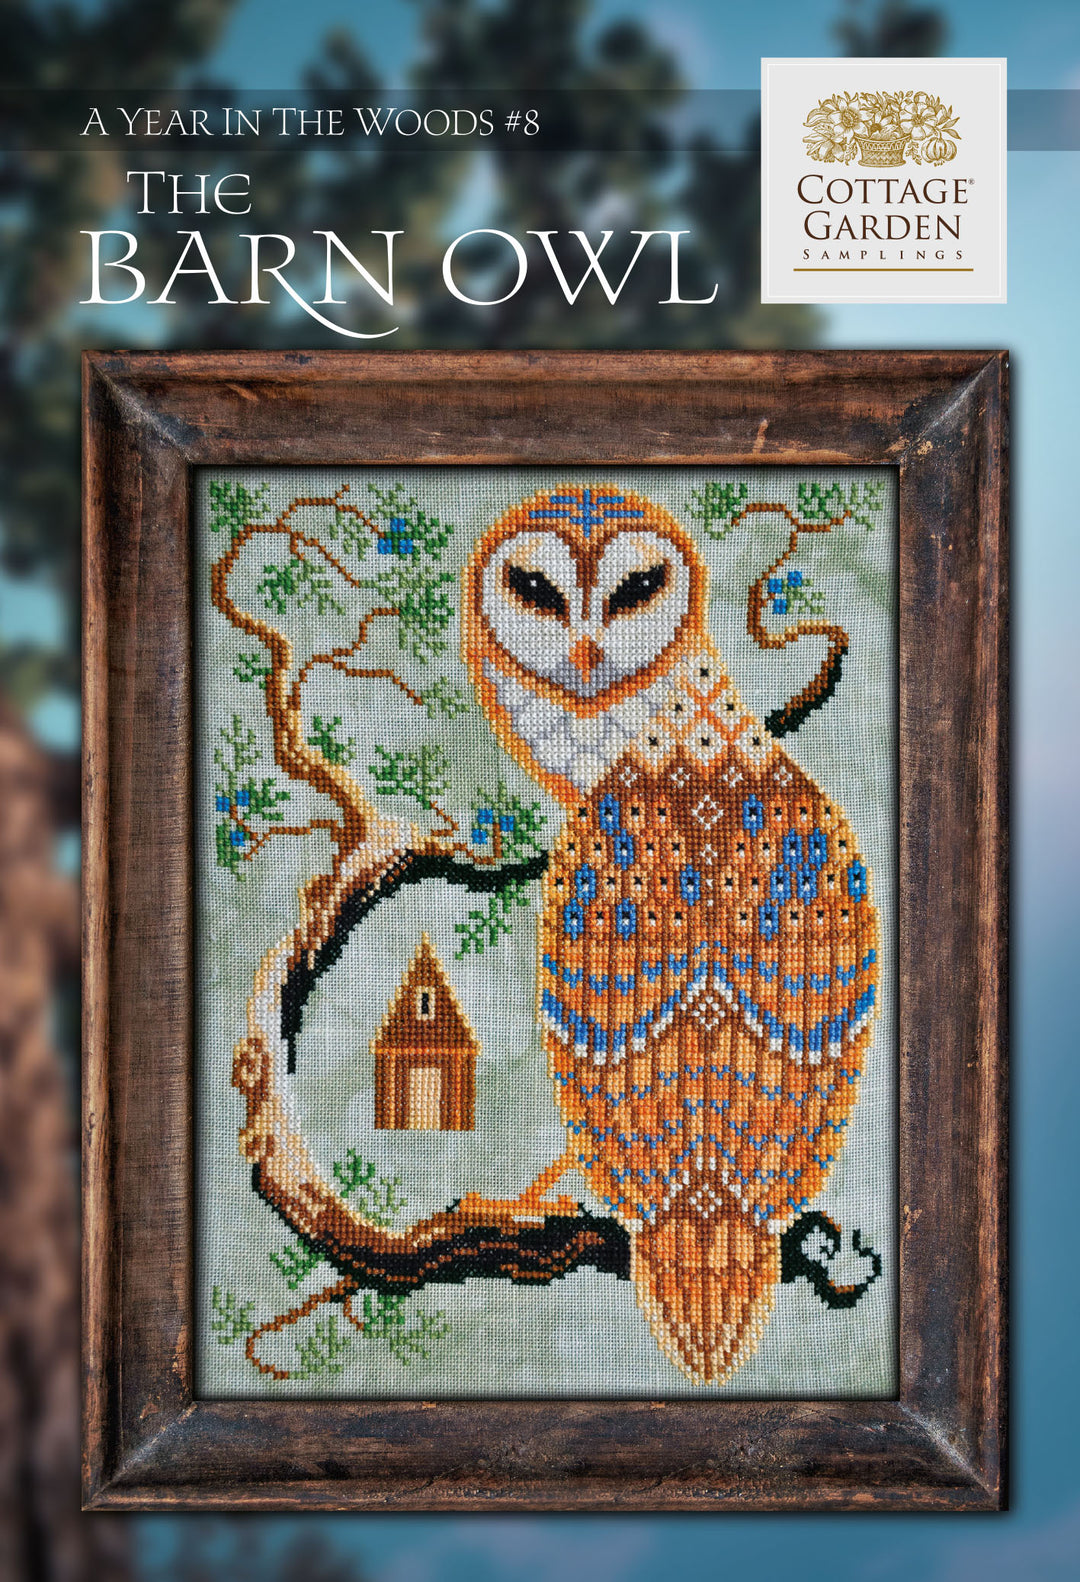 The Barn Owl, A Year in the Woods #8 | Cottage Garden Samplings